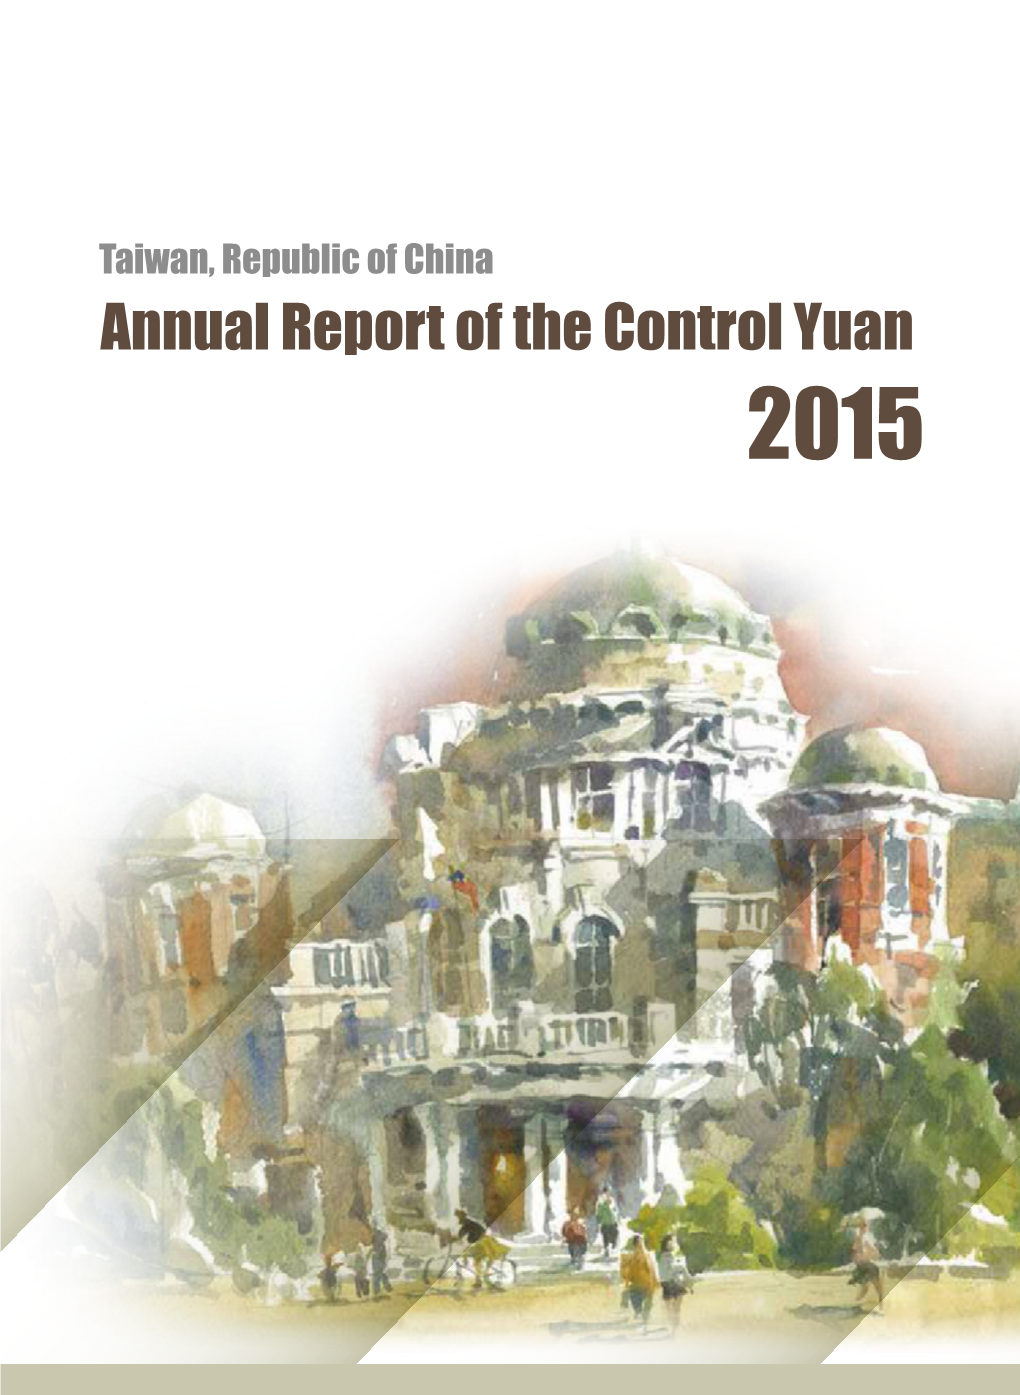 Annual Report of the Control Yuan 2015